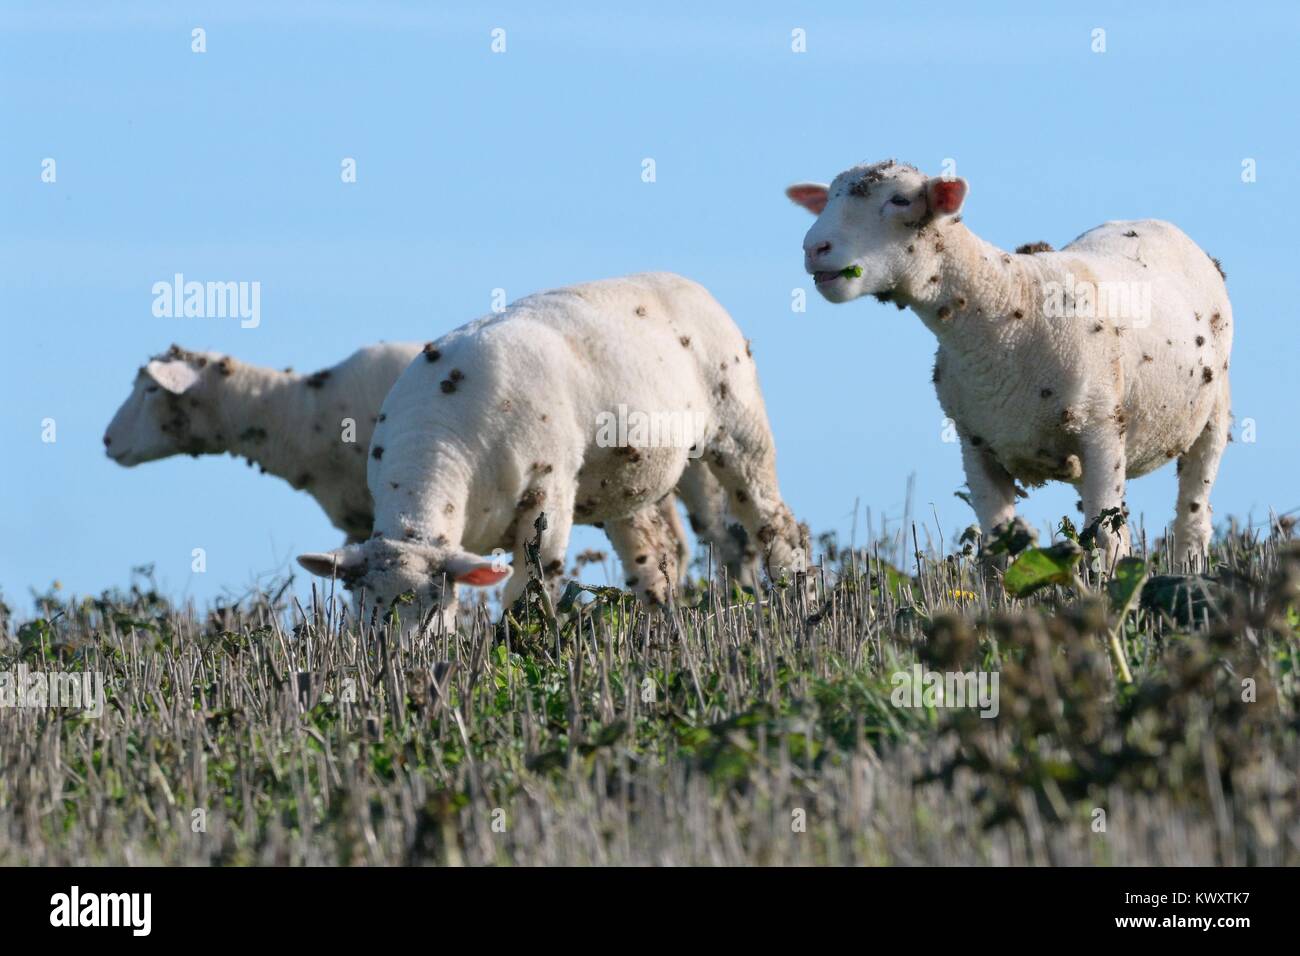 Domestic sheep (Ovis aries) grazing weeds in a stubble field with many Burdock (Arctium sp.) burrs attached, Cornwall, UK, October. Stock Photo